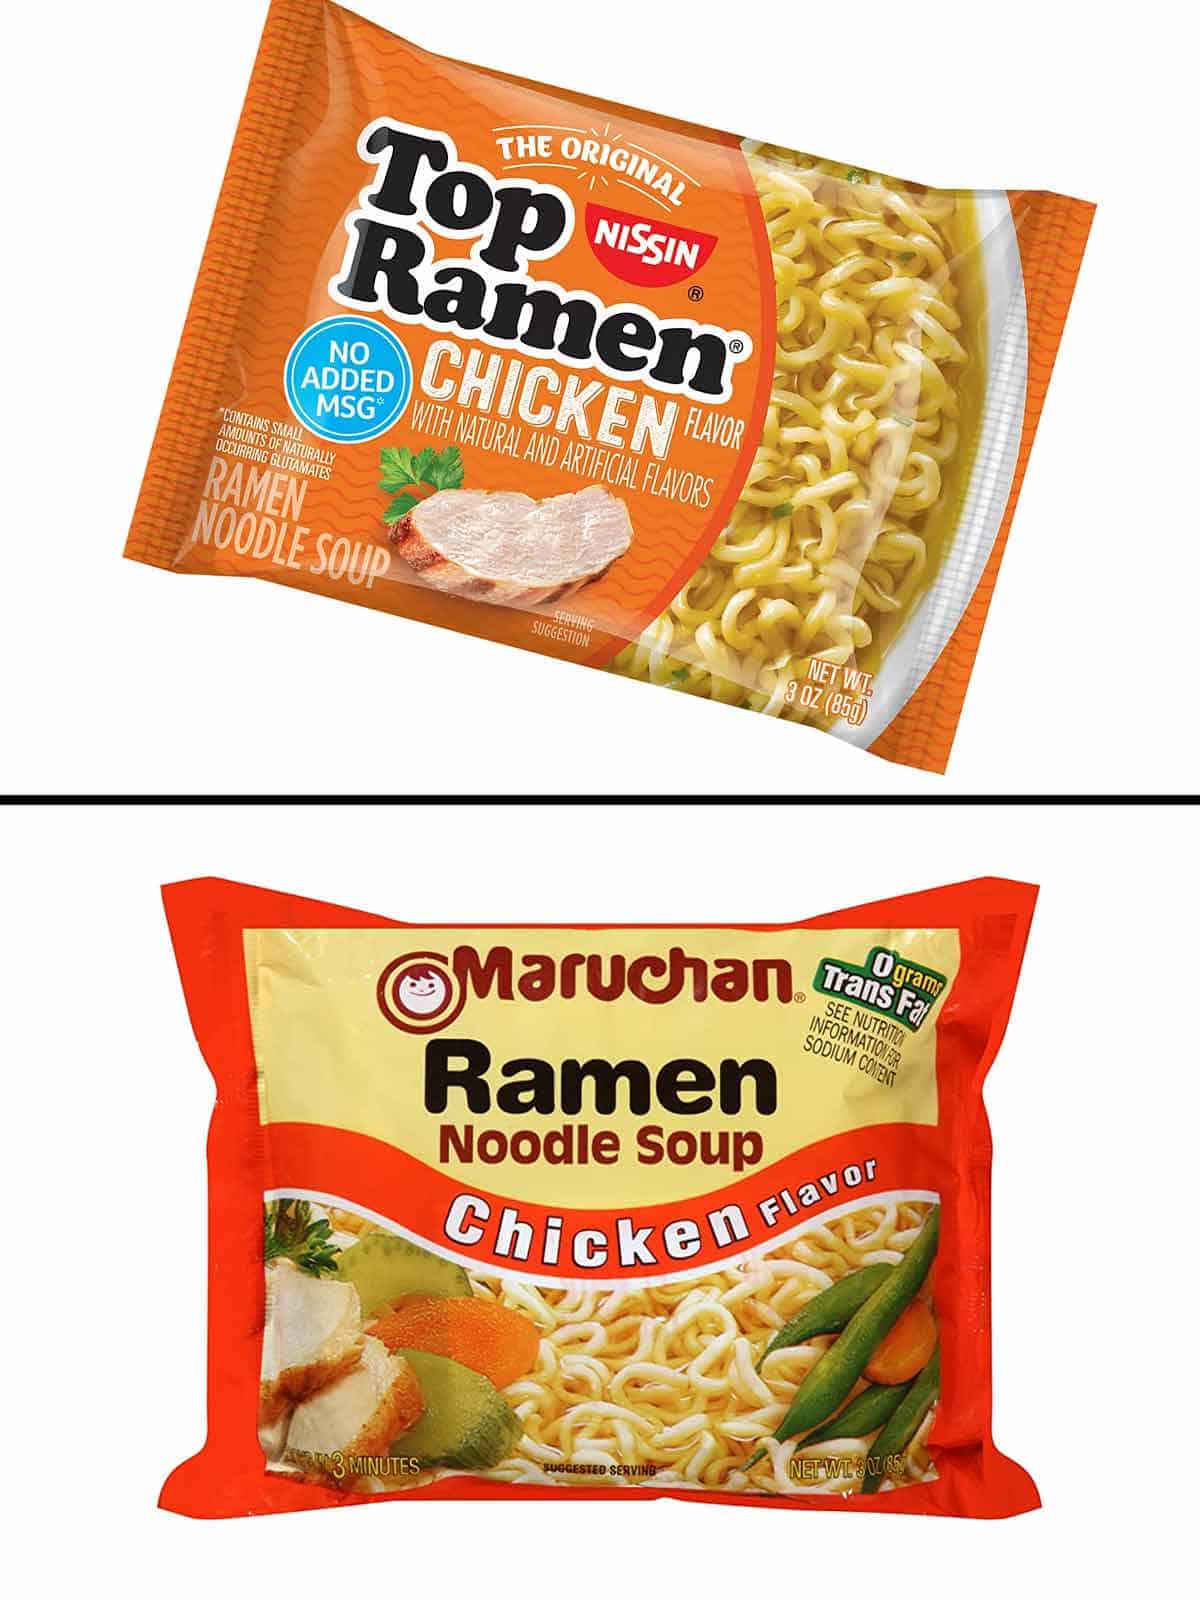 Maruchan vs Nissin: What’s The Difference